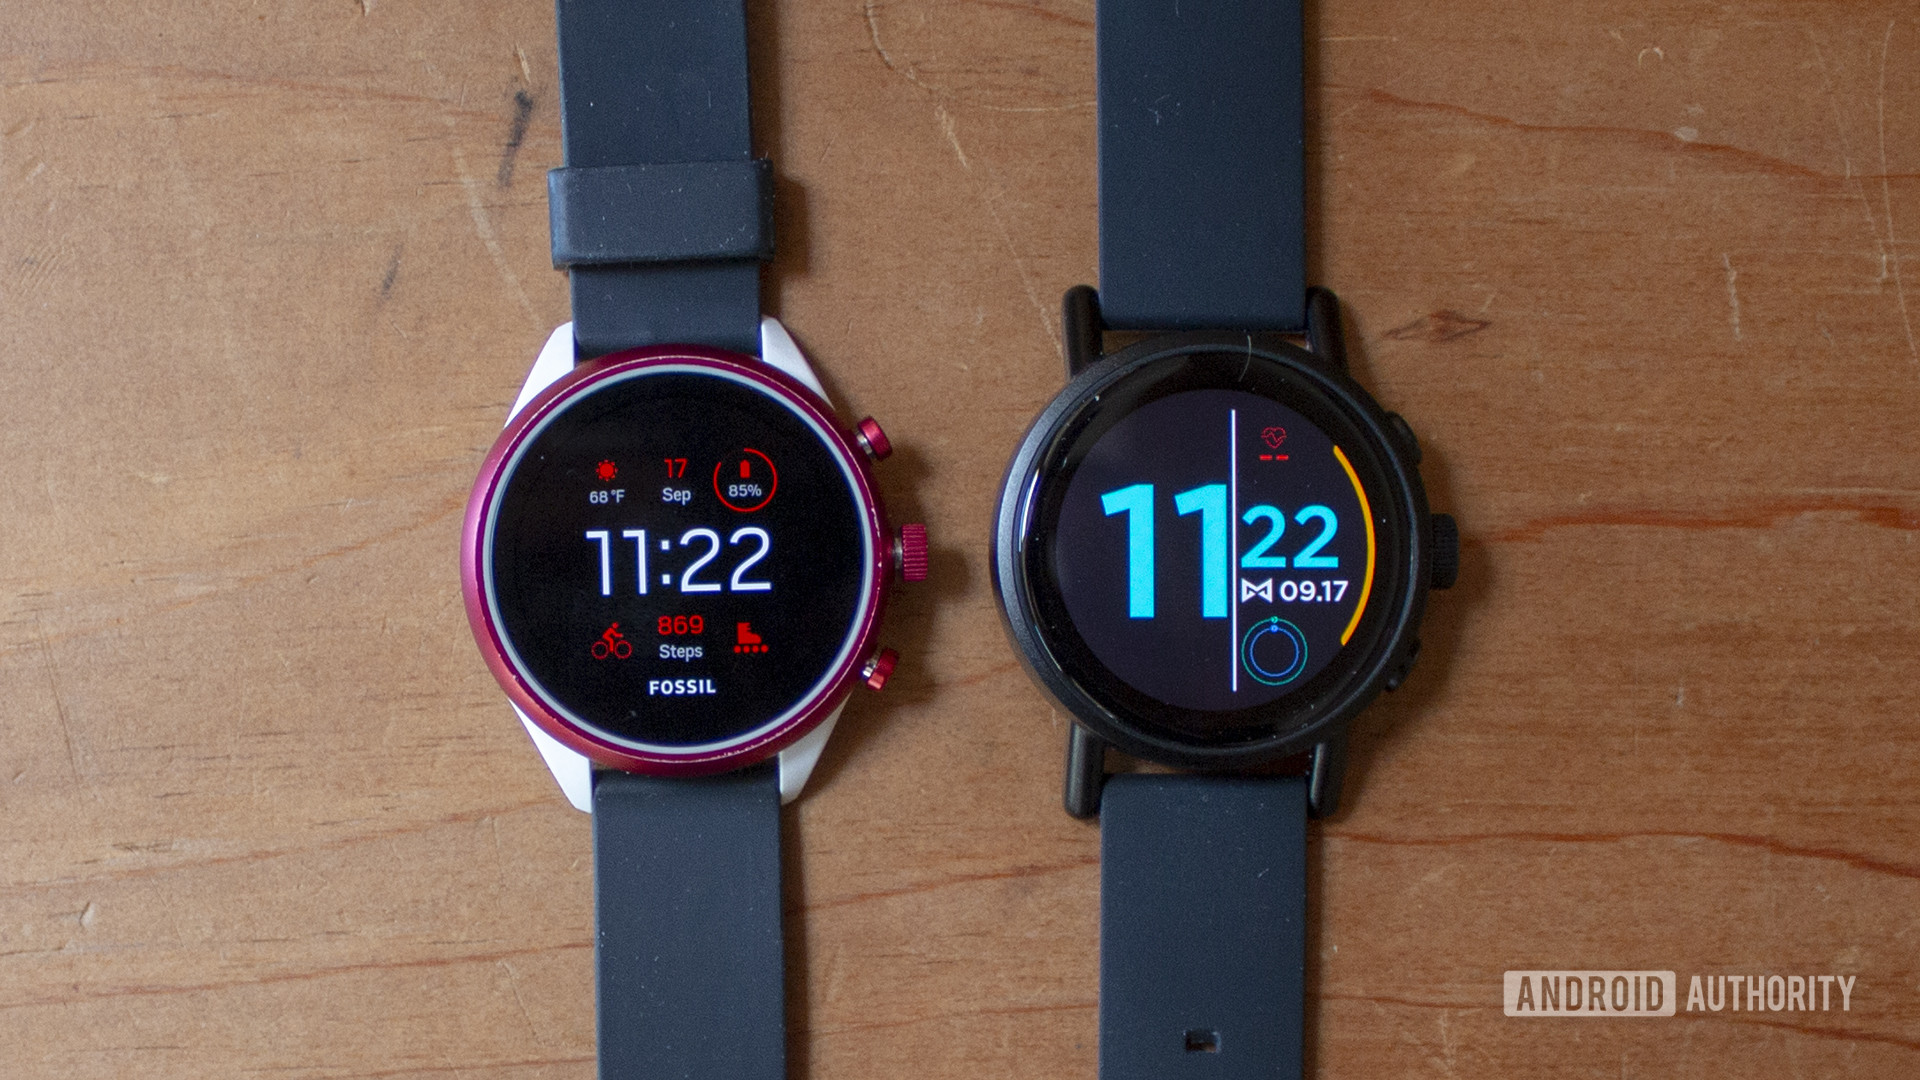 Misfit Vapor X Smartwatch Right next to Fossil Sport Left both showing front displays